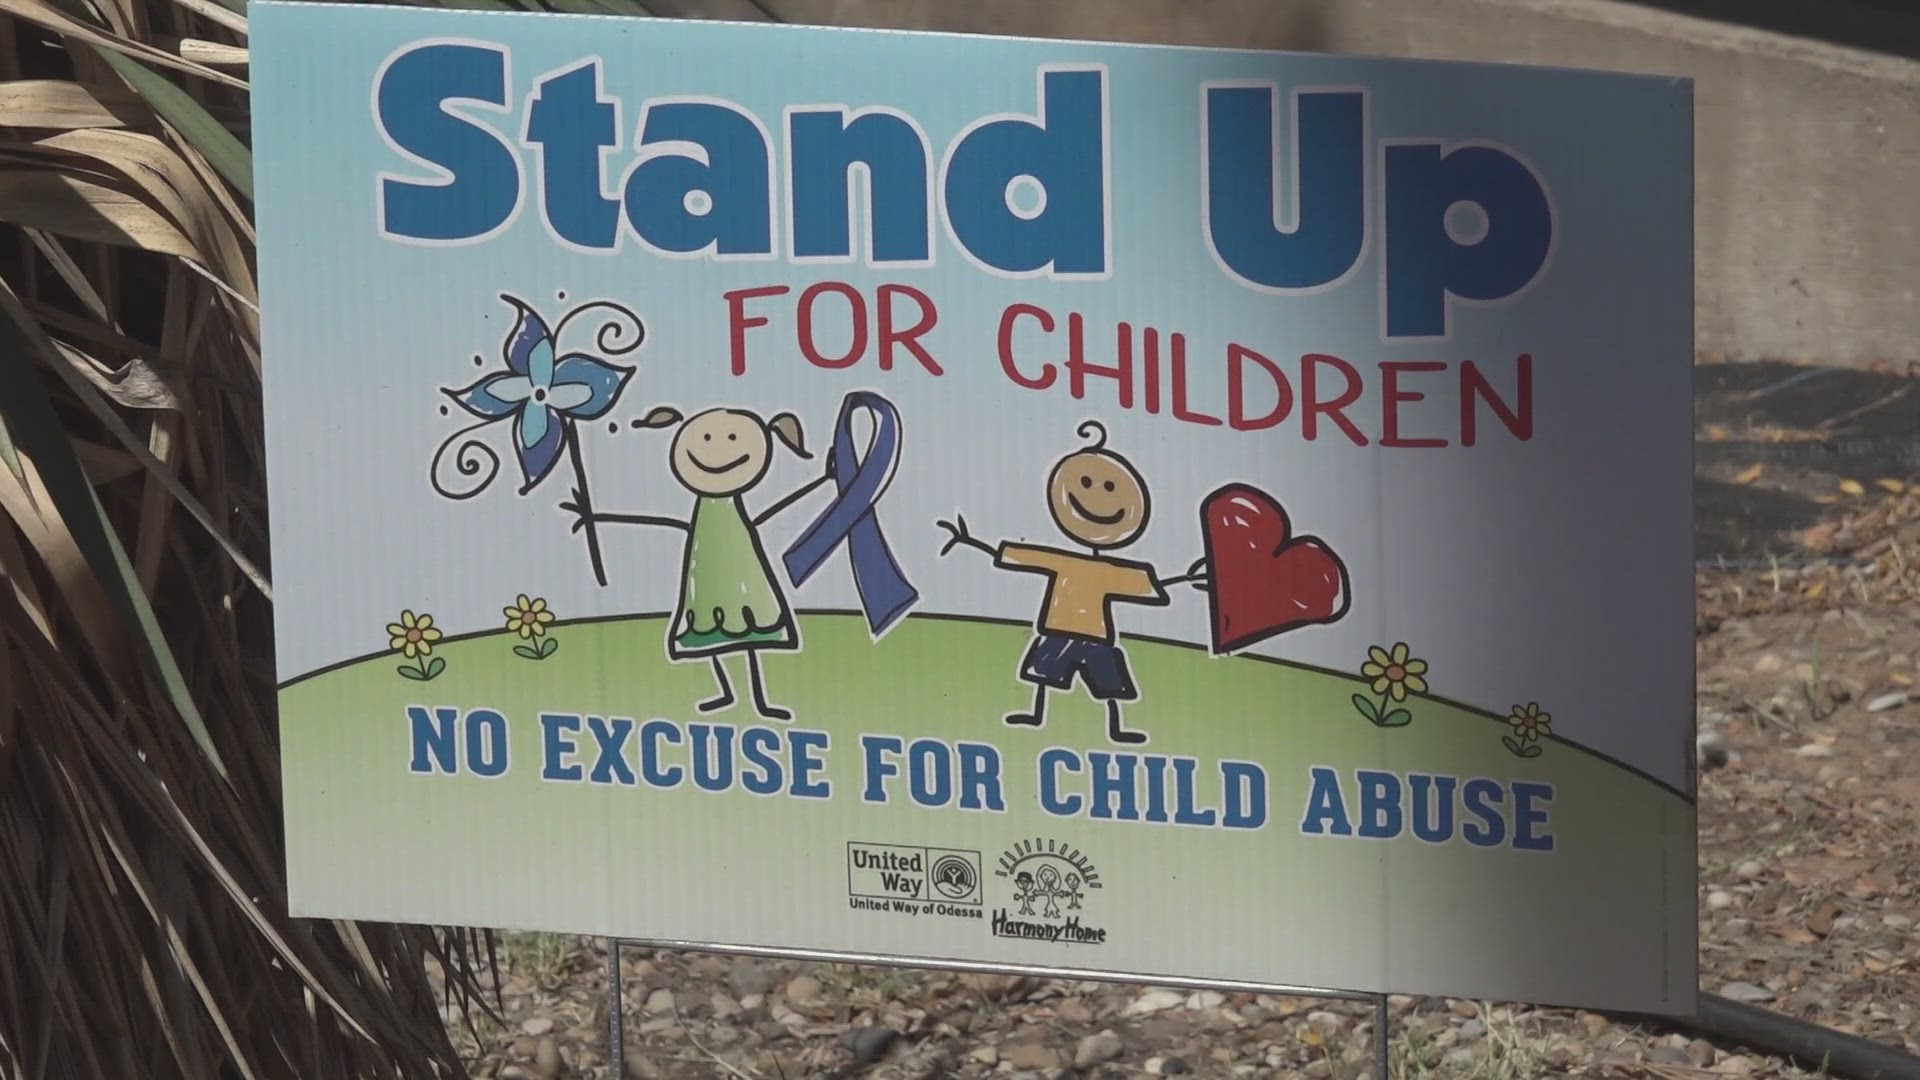 Harmony Home discusses signs to look for when identifying child abuse.